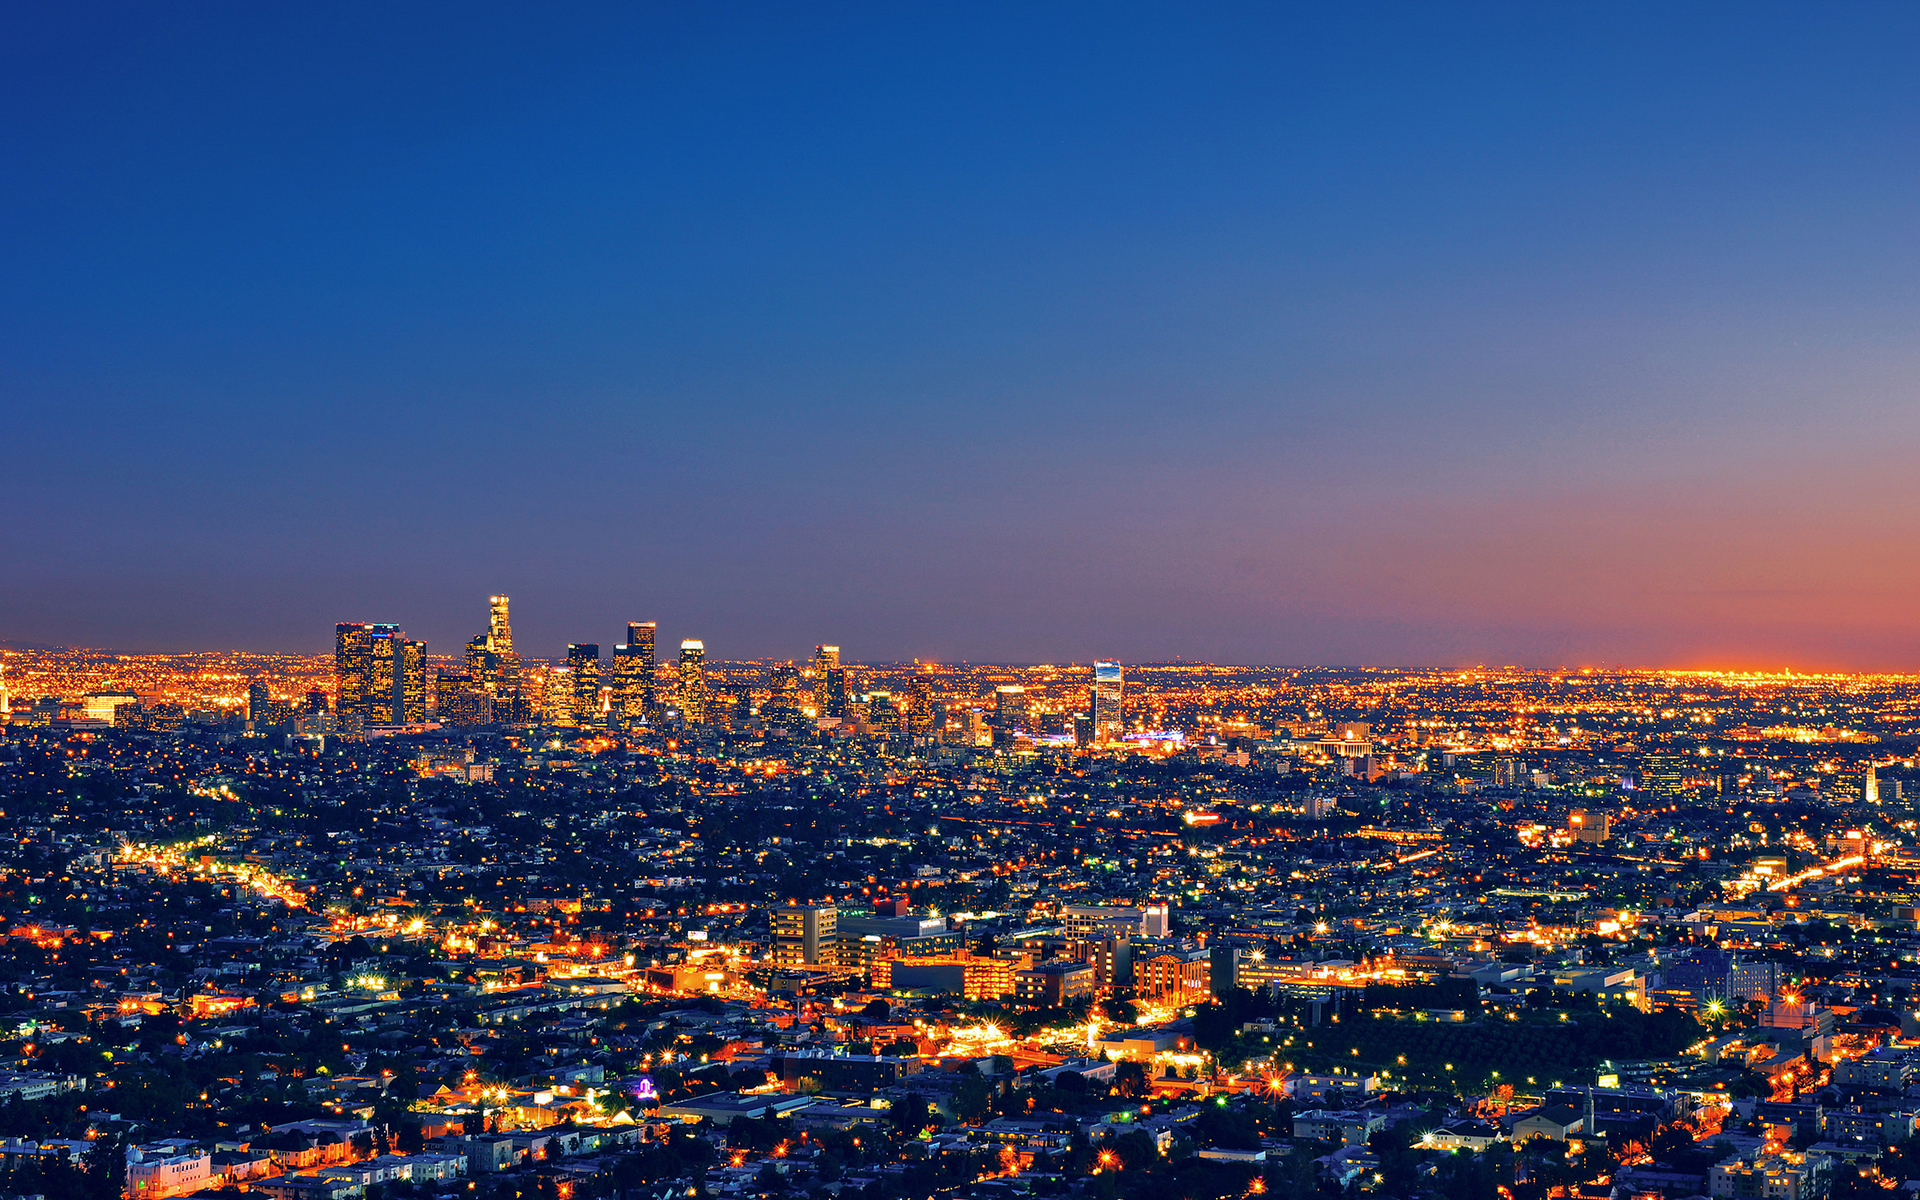 los, Angeles, Cities, Architecture, Buildings, Skyscrapers, Night, Lights, Sunset, Sunrise Wallpaper